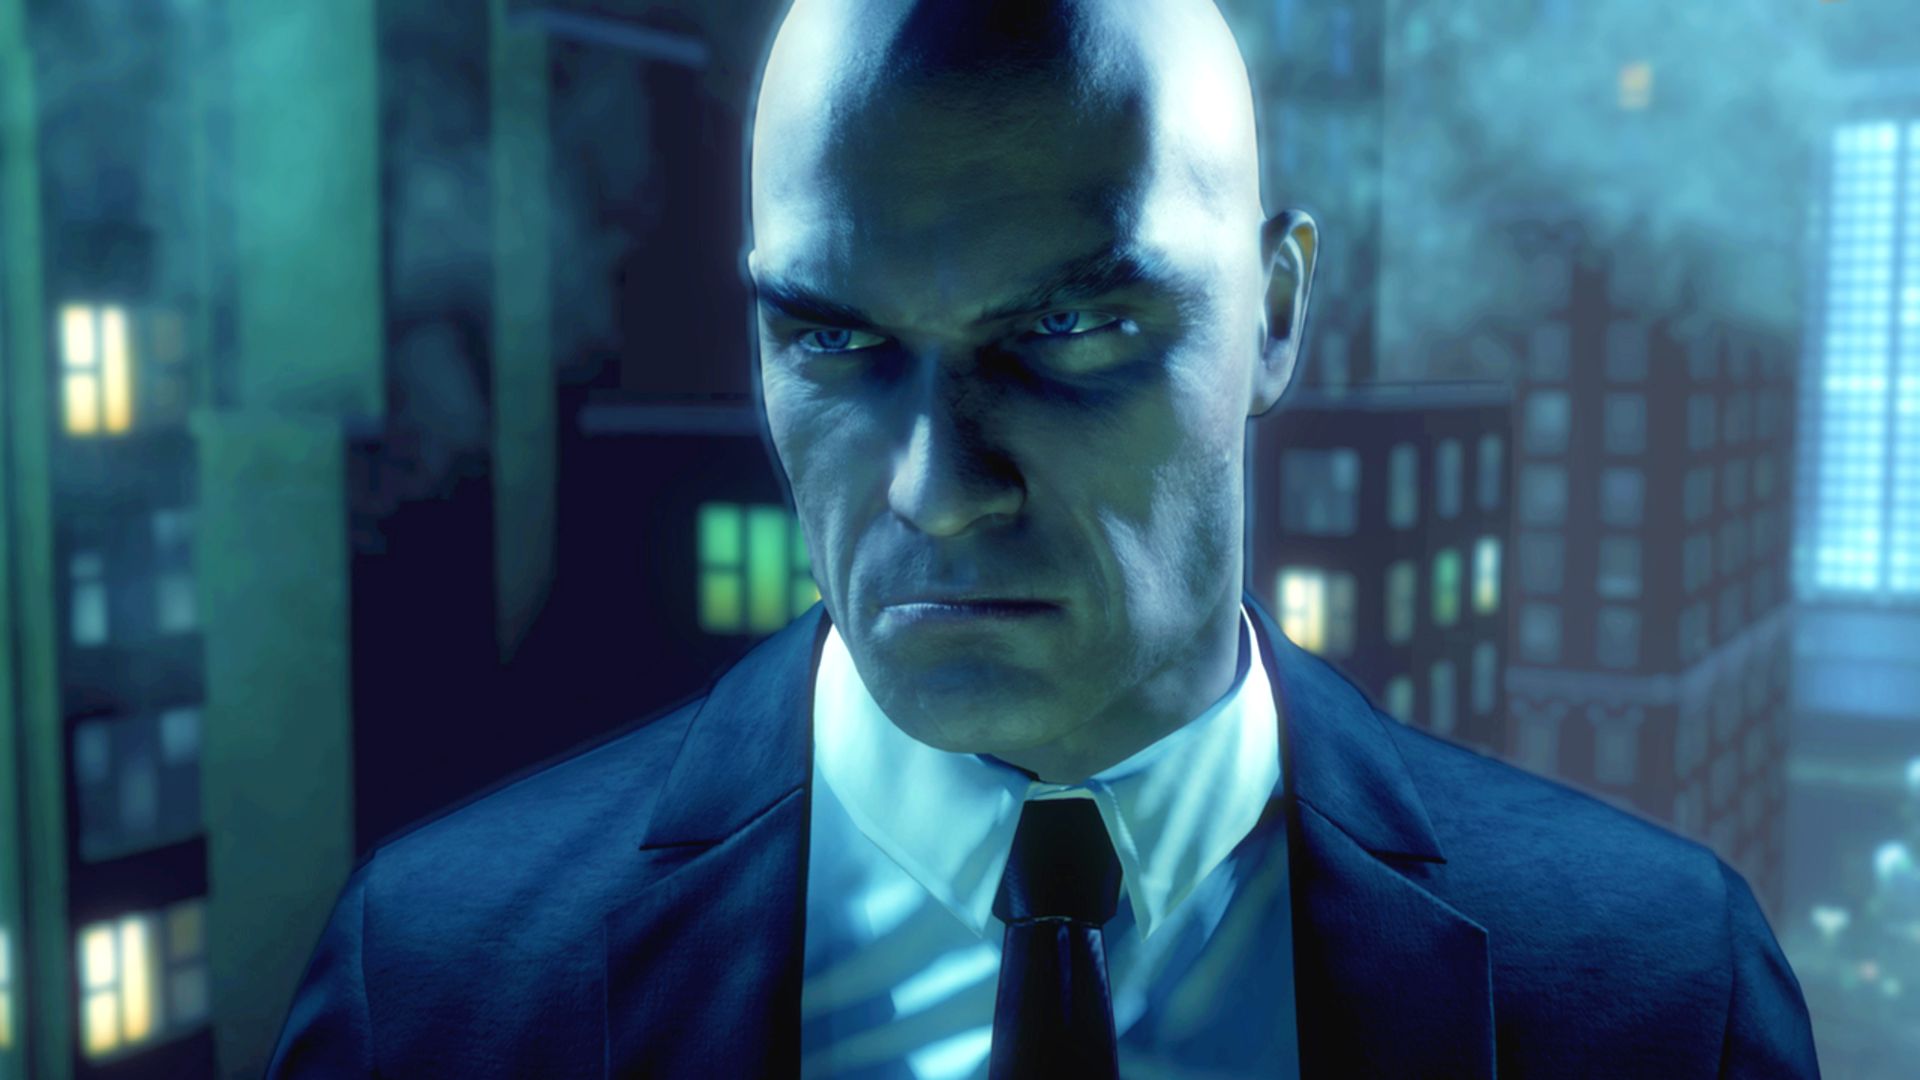 How Hitman's Agent 47 became an iconic anti-hero